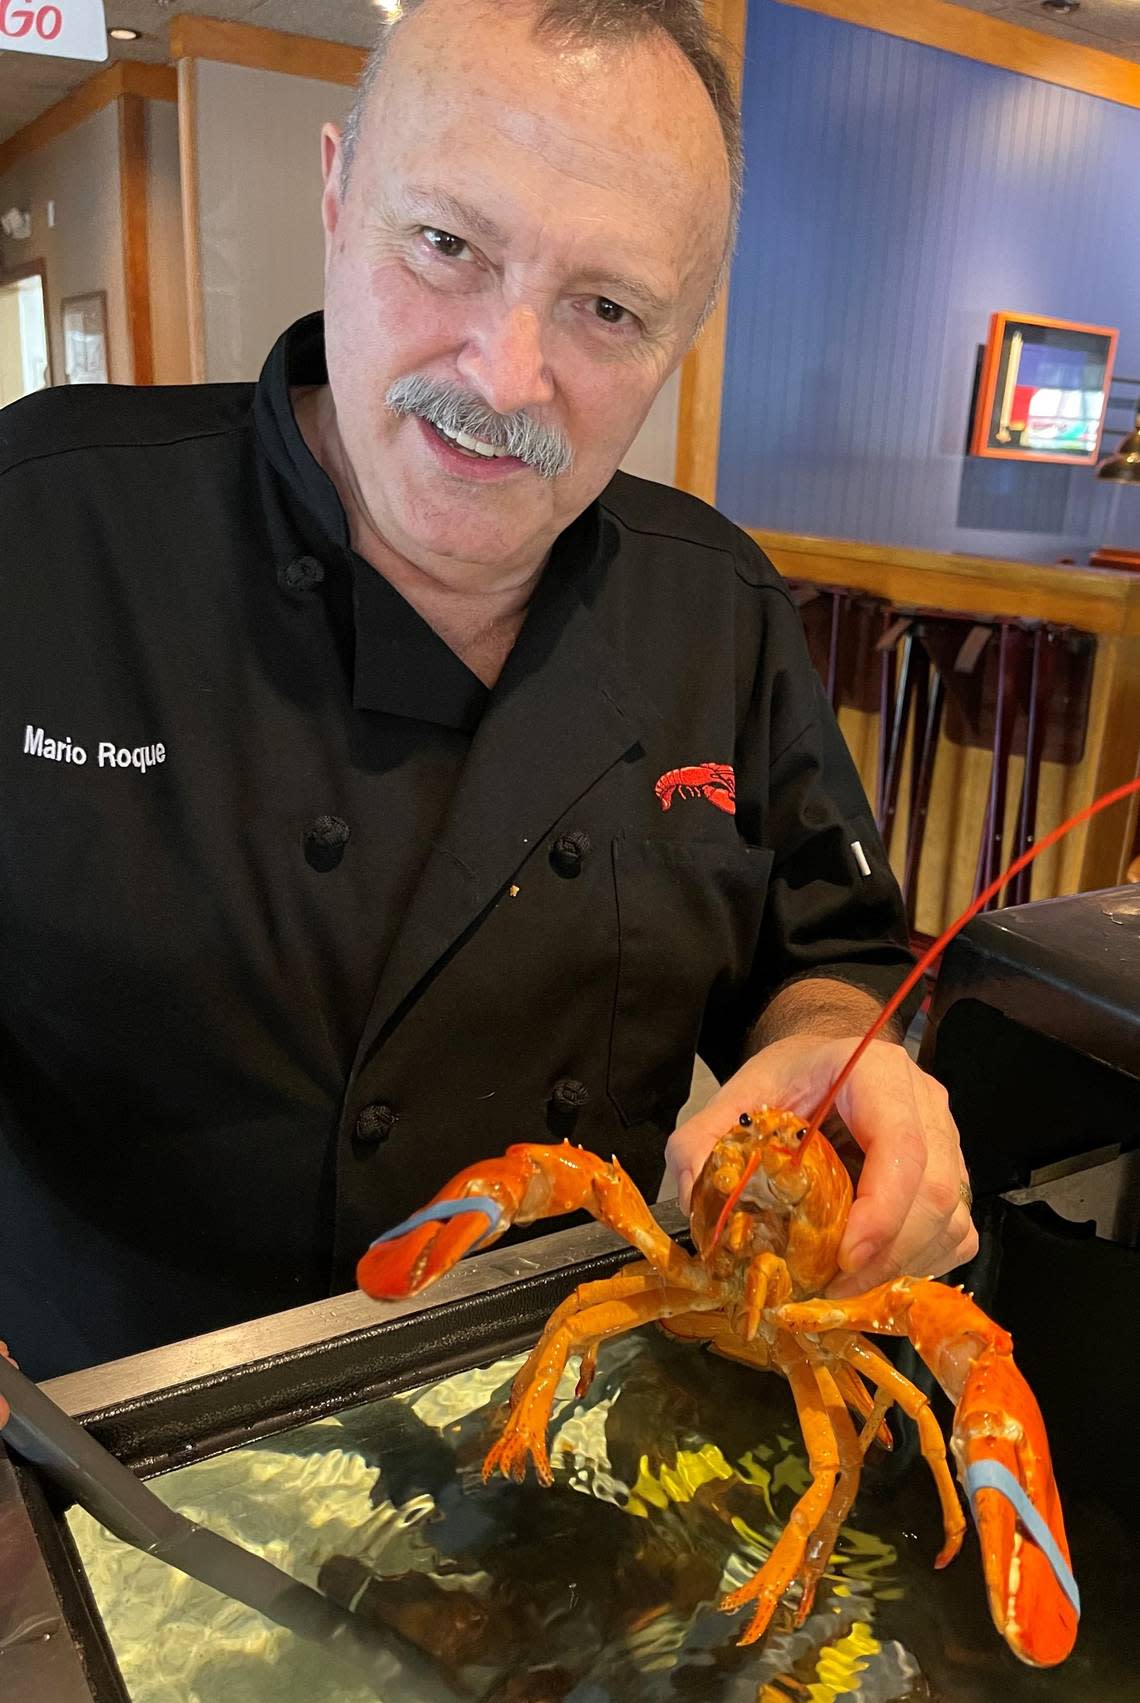 Red Lobster manager Mario Roque found this extremely rare orange lobster in a seafood shipment to his restaurant. The crustacean, now named Cheddar, was rescued and given to Ripley’s Aquarium in Myrtle Beach.